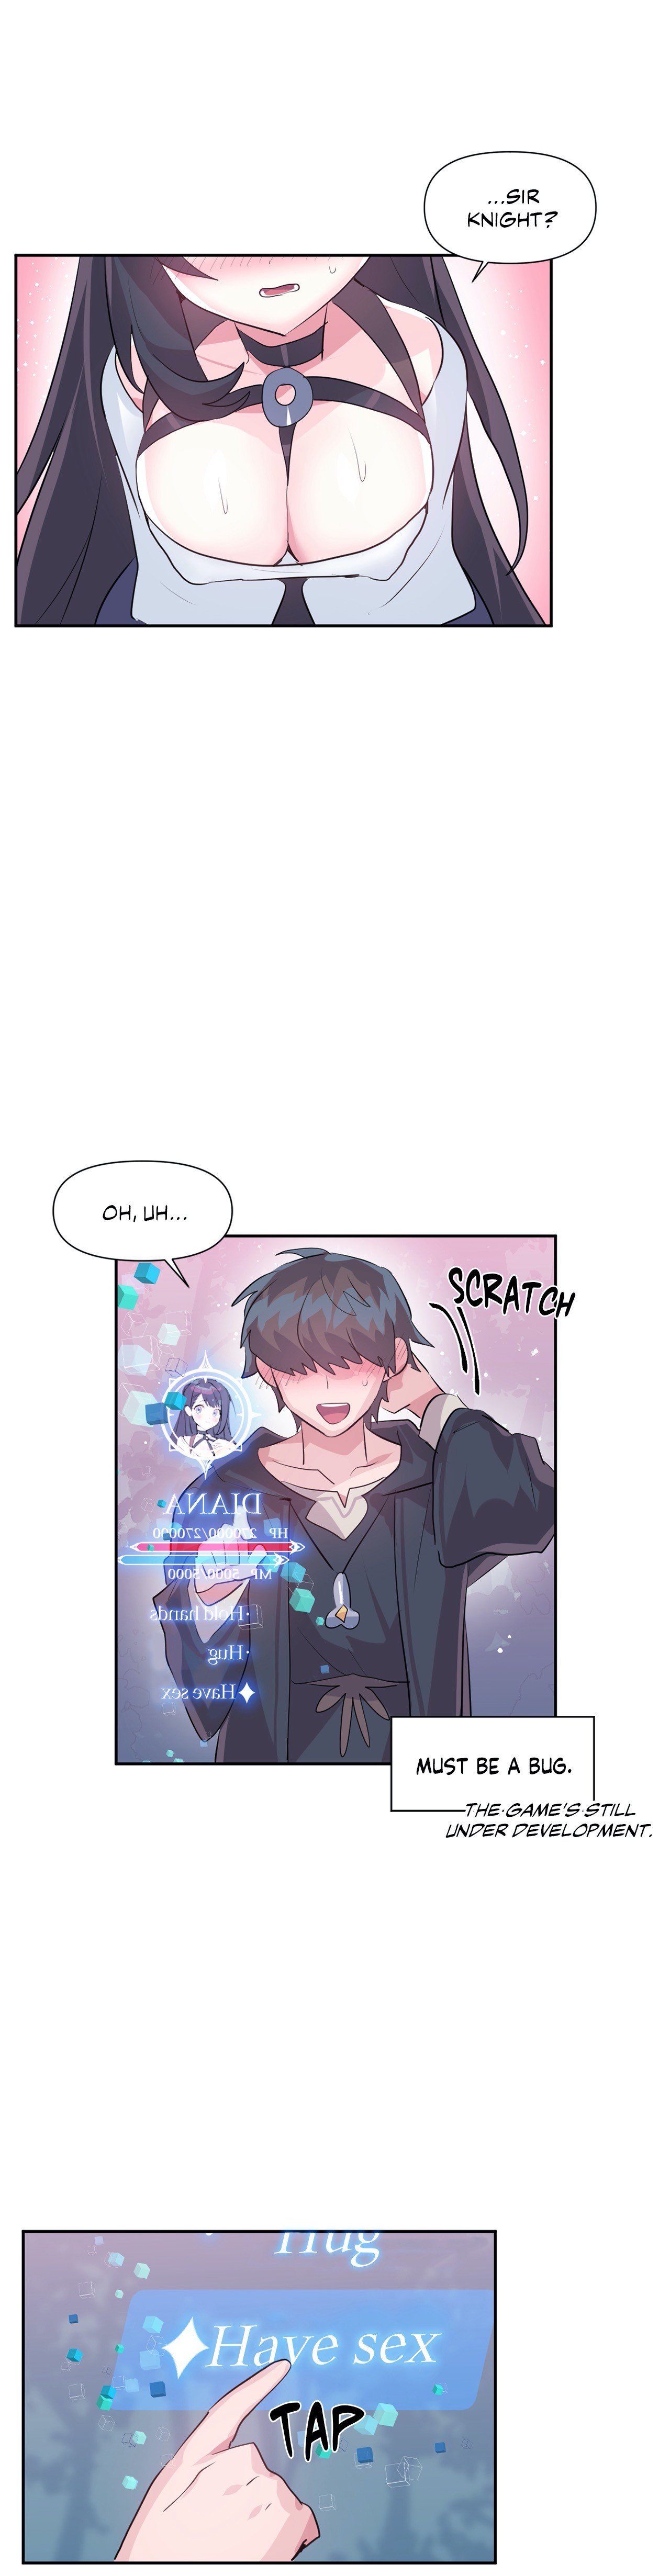 log-in-to-lust-a-land-chap-34-19